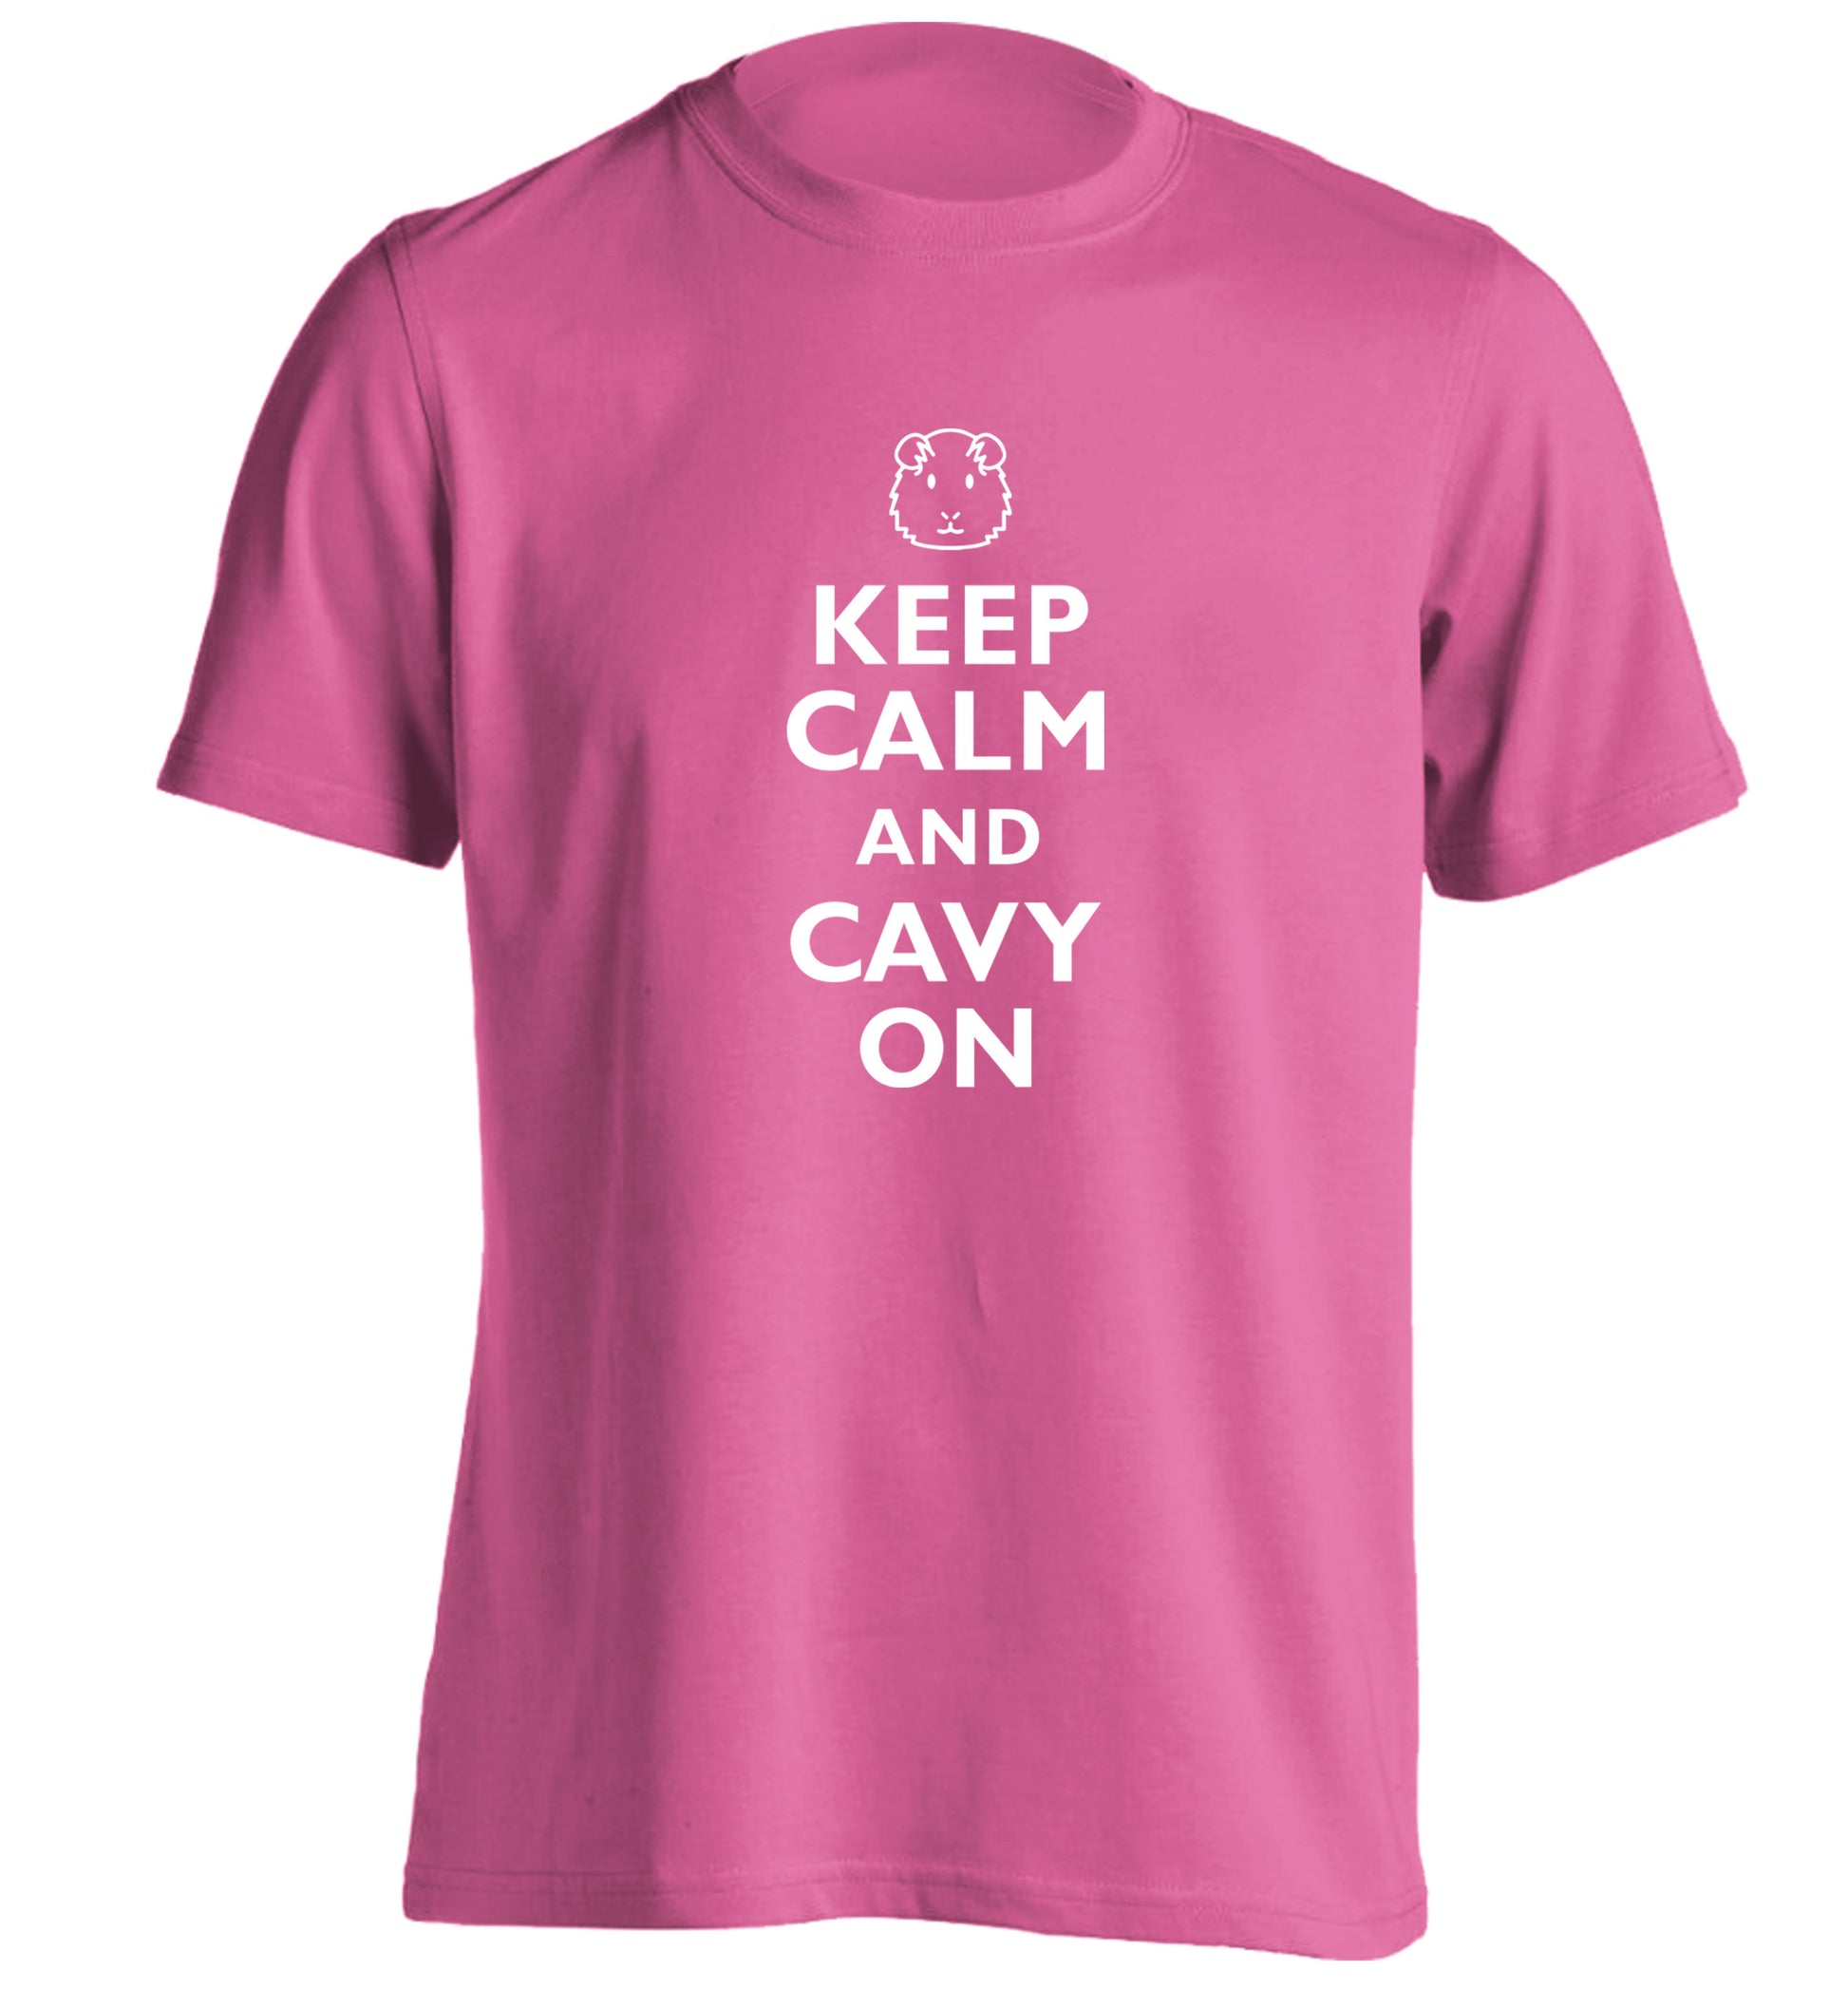 Keep calm and cavvy on adults unisex pink Tshirt 2XL